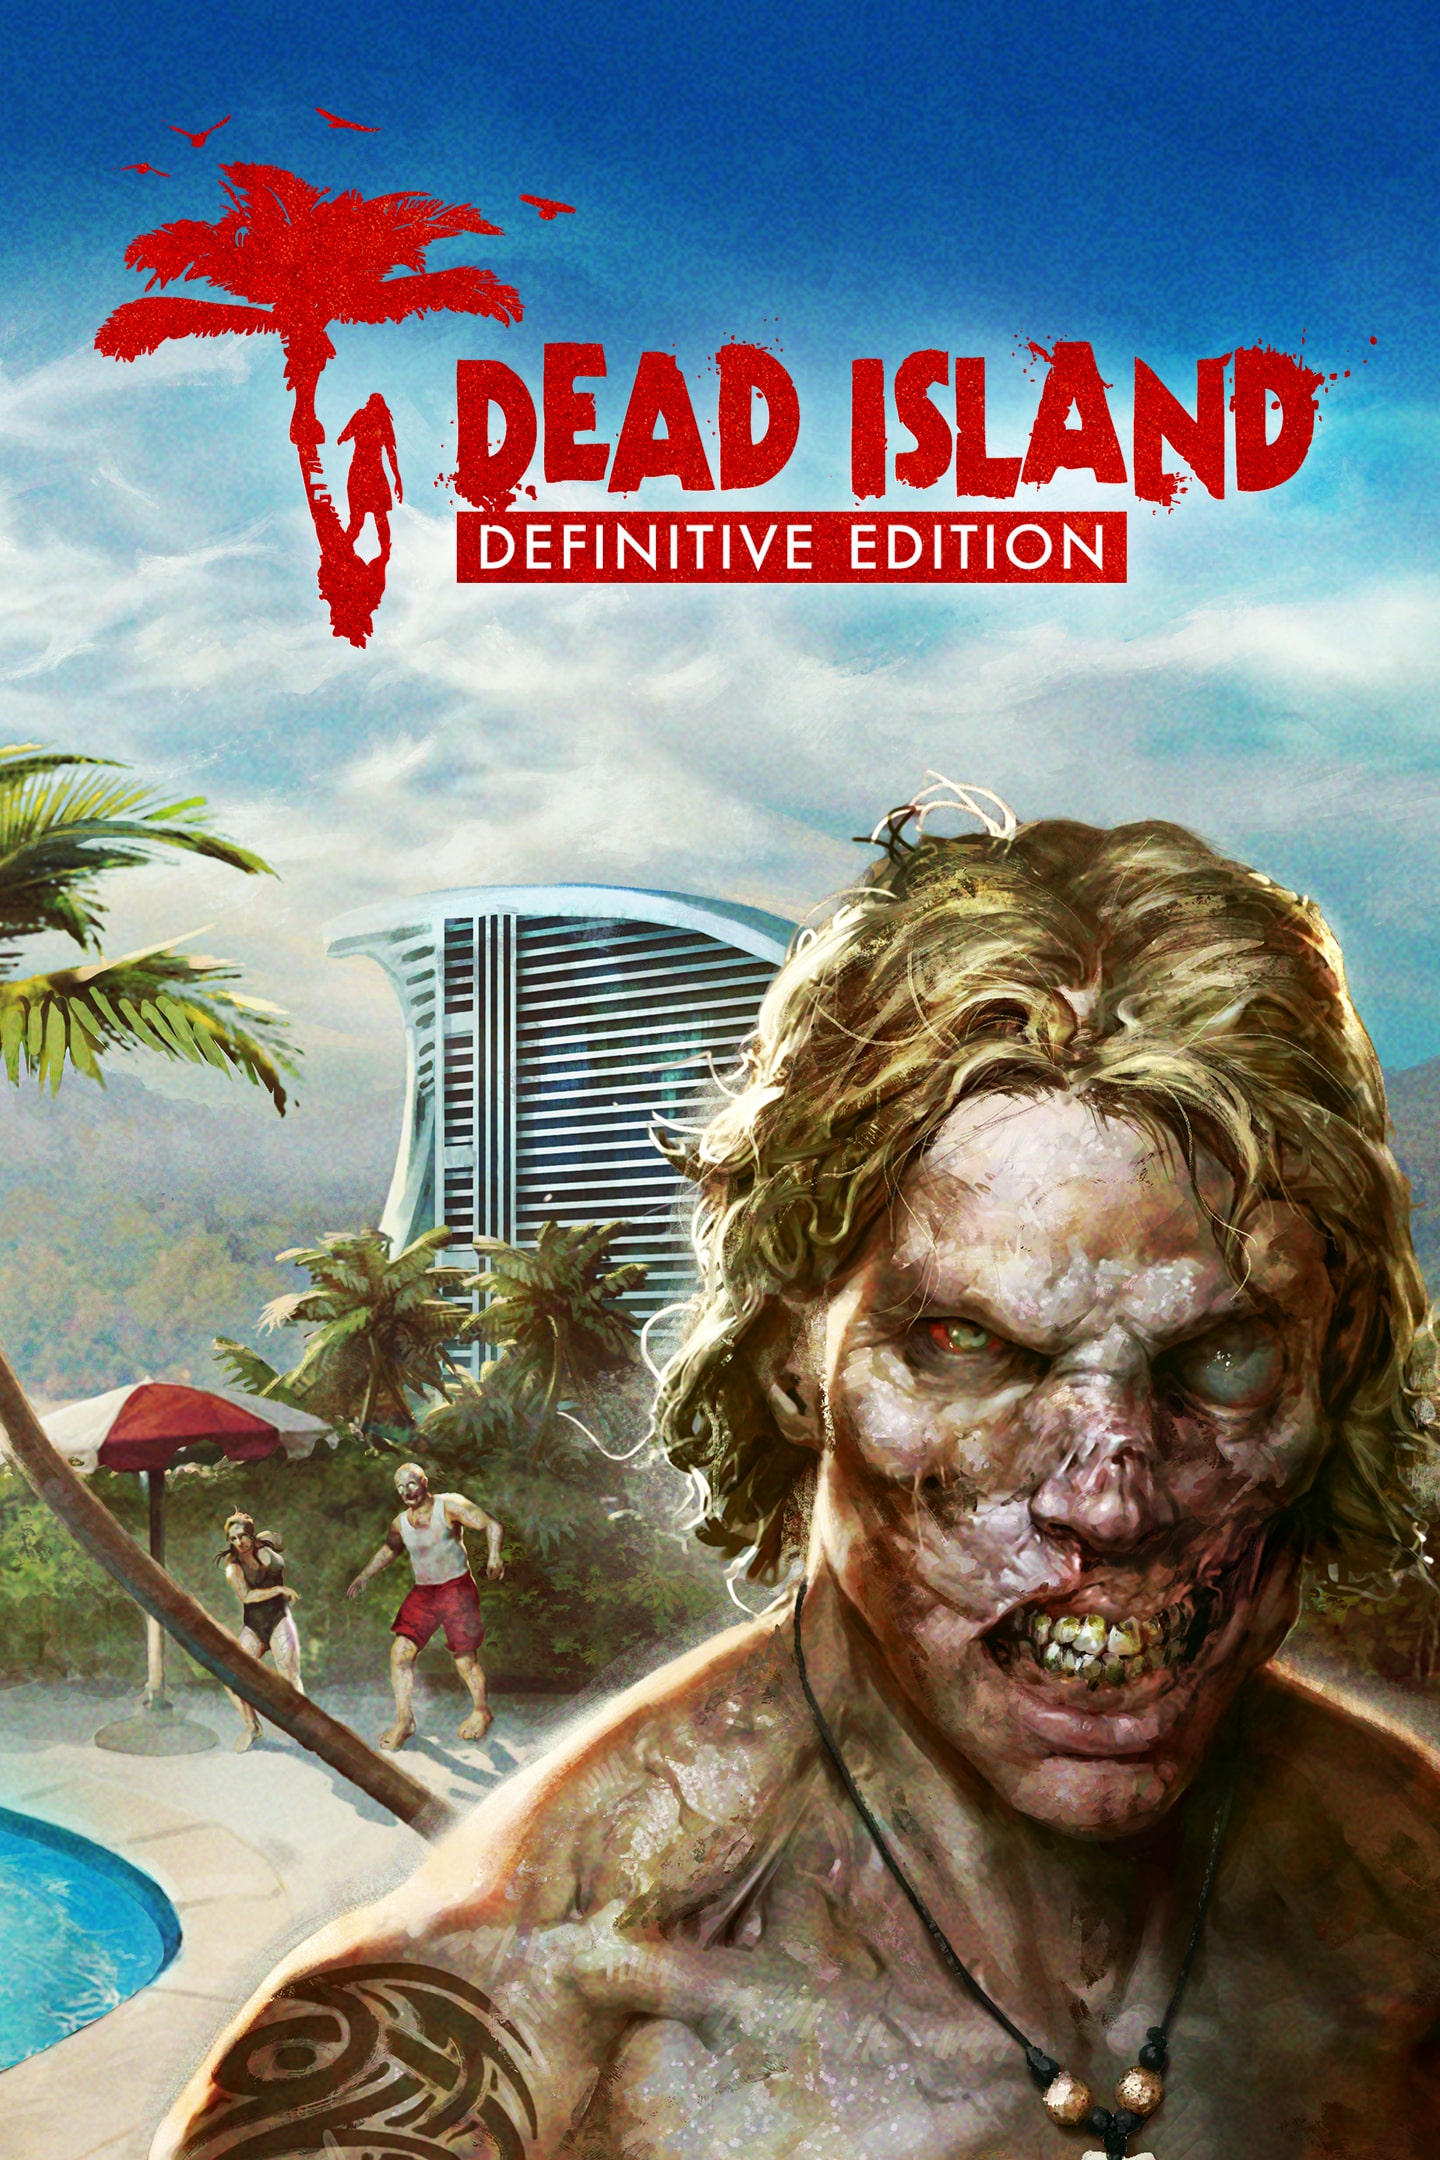 Buy Dead Island Definitive Collection Steam CD key